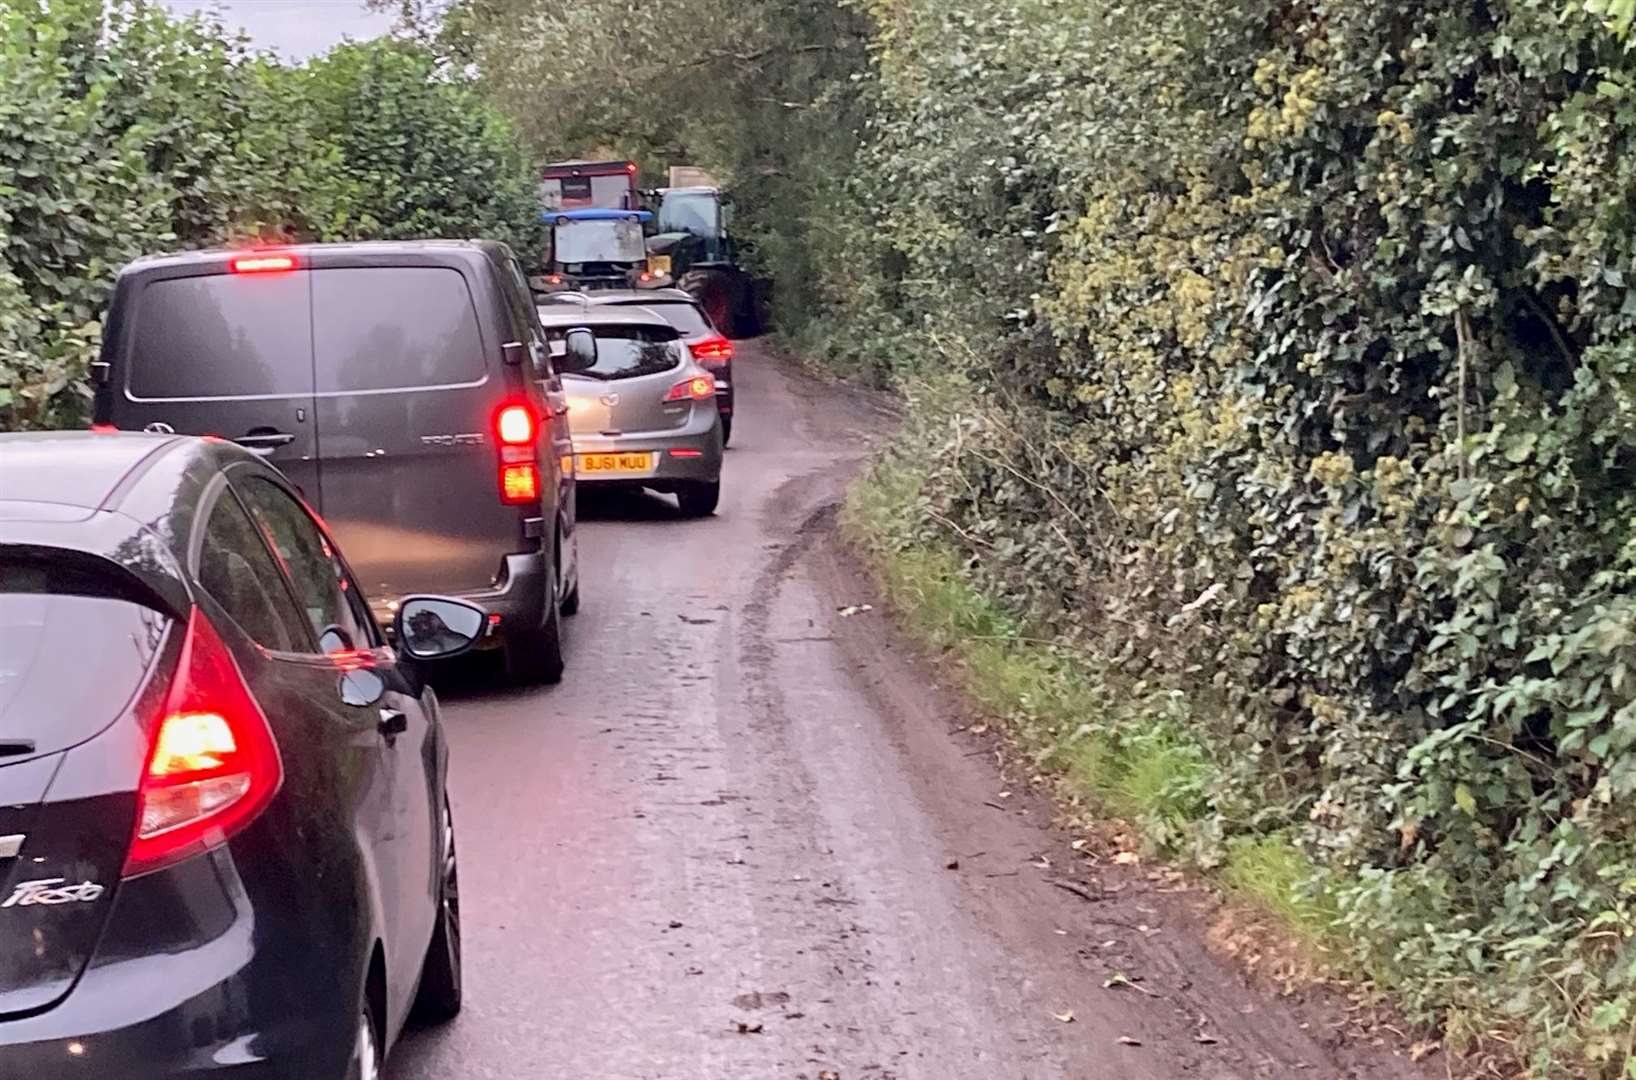 A congested back road near Maidstone